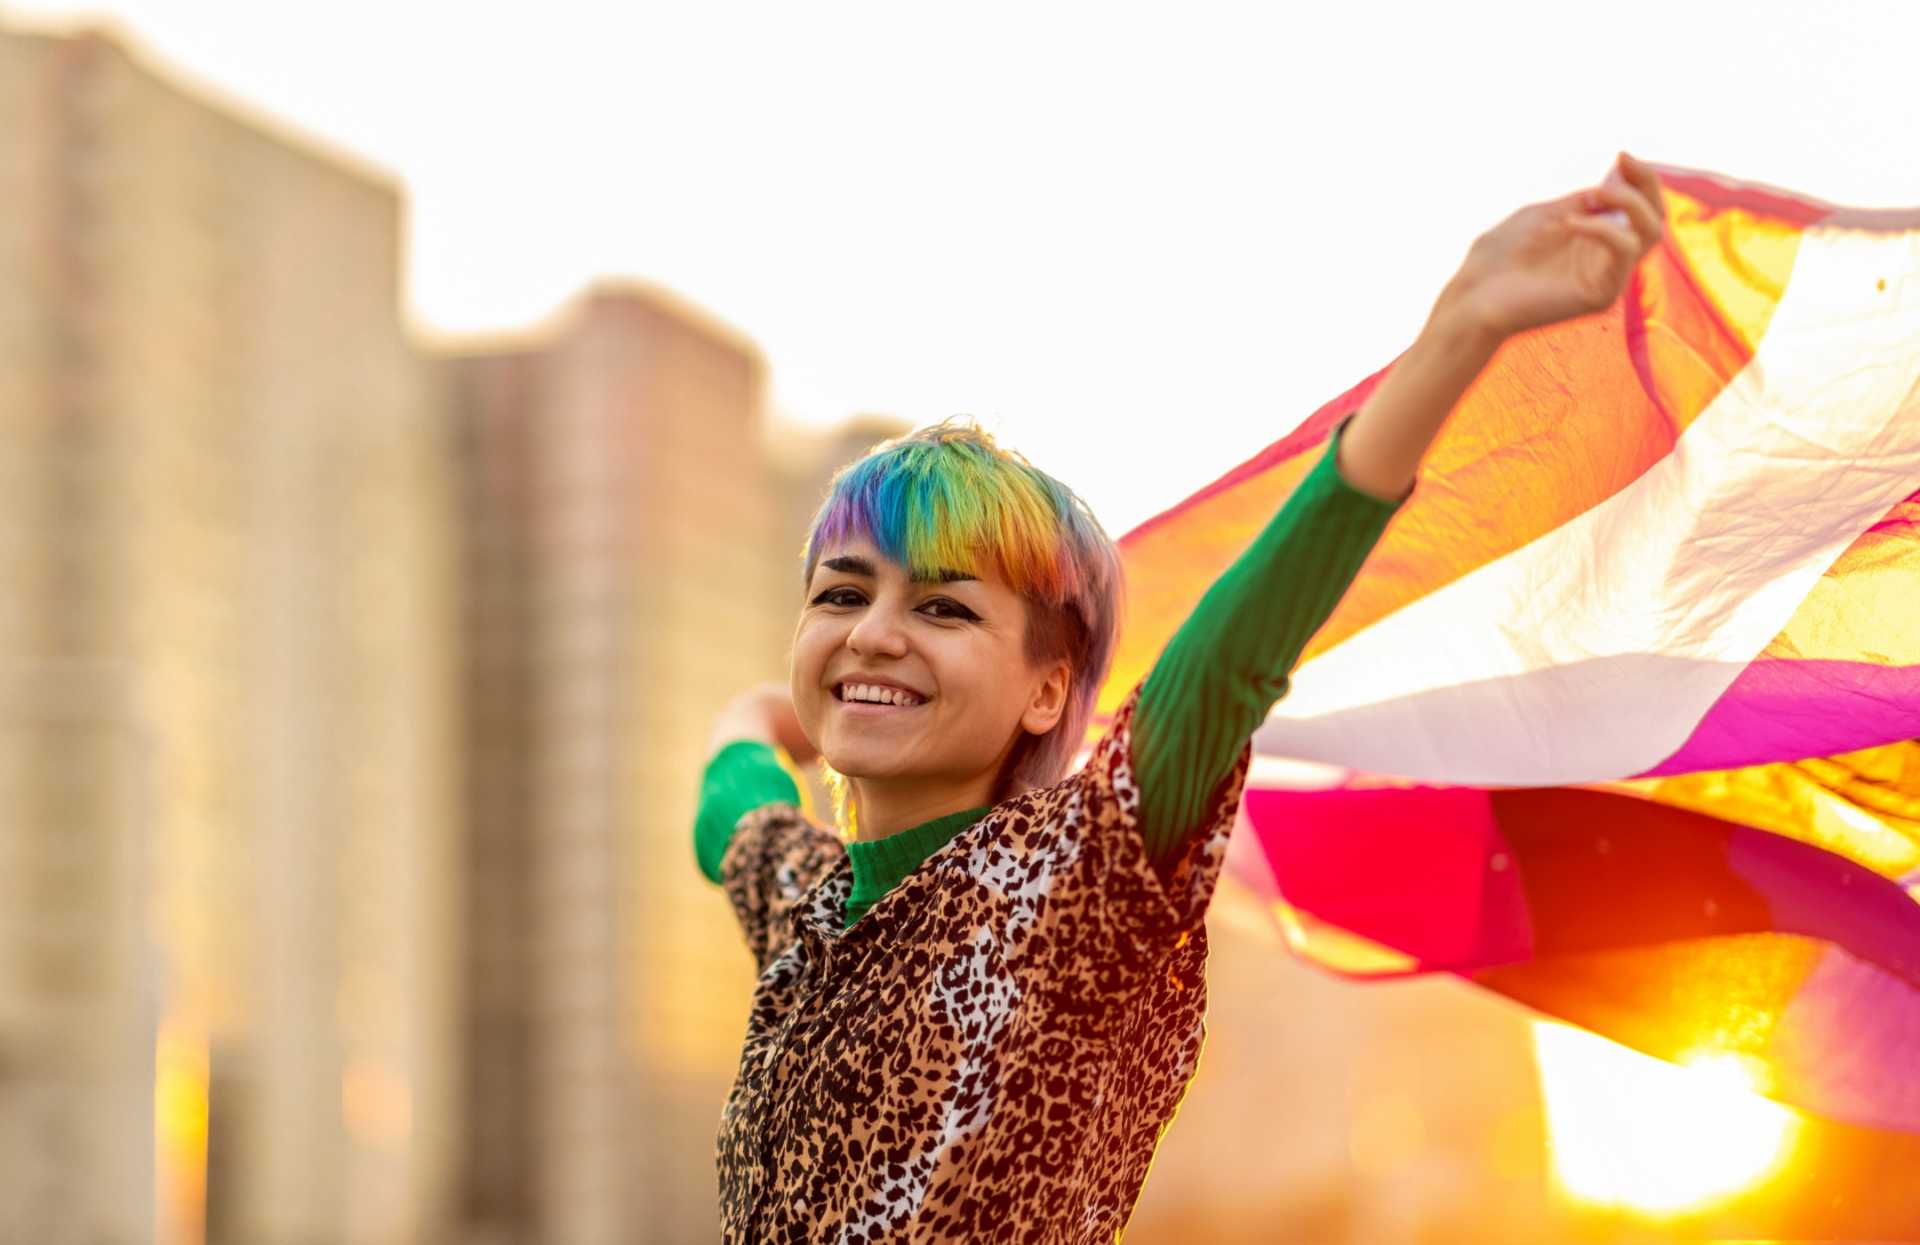 Gender non-conforming image with rainbow flag